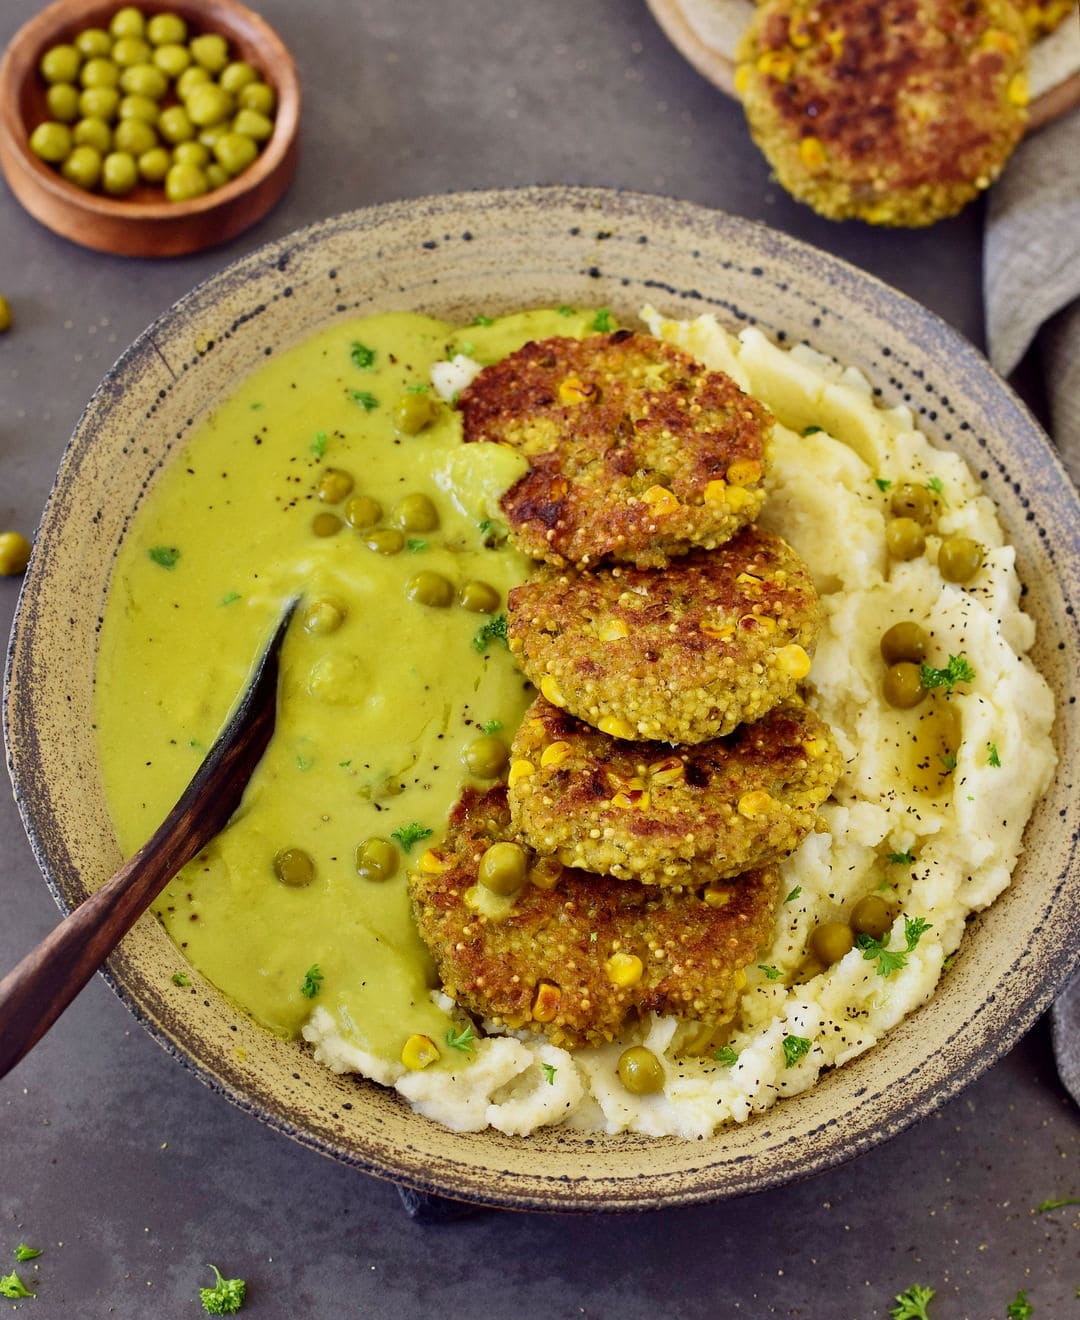 Millet fritters with mashed potatoes and a creamy pea sauce. This recipe is vegan, gluten-free, healthy and the perfect comfort food